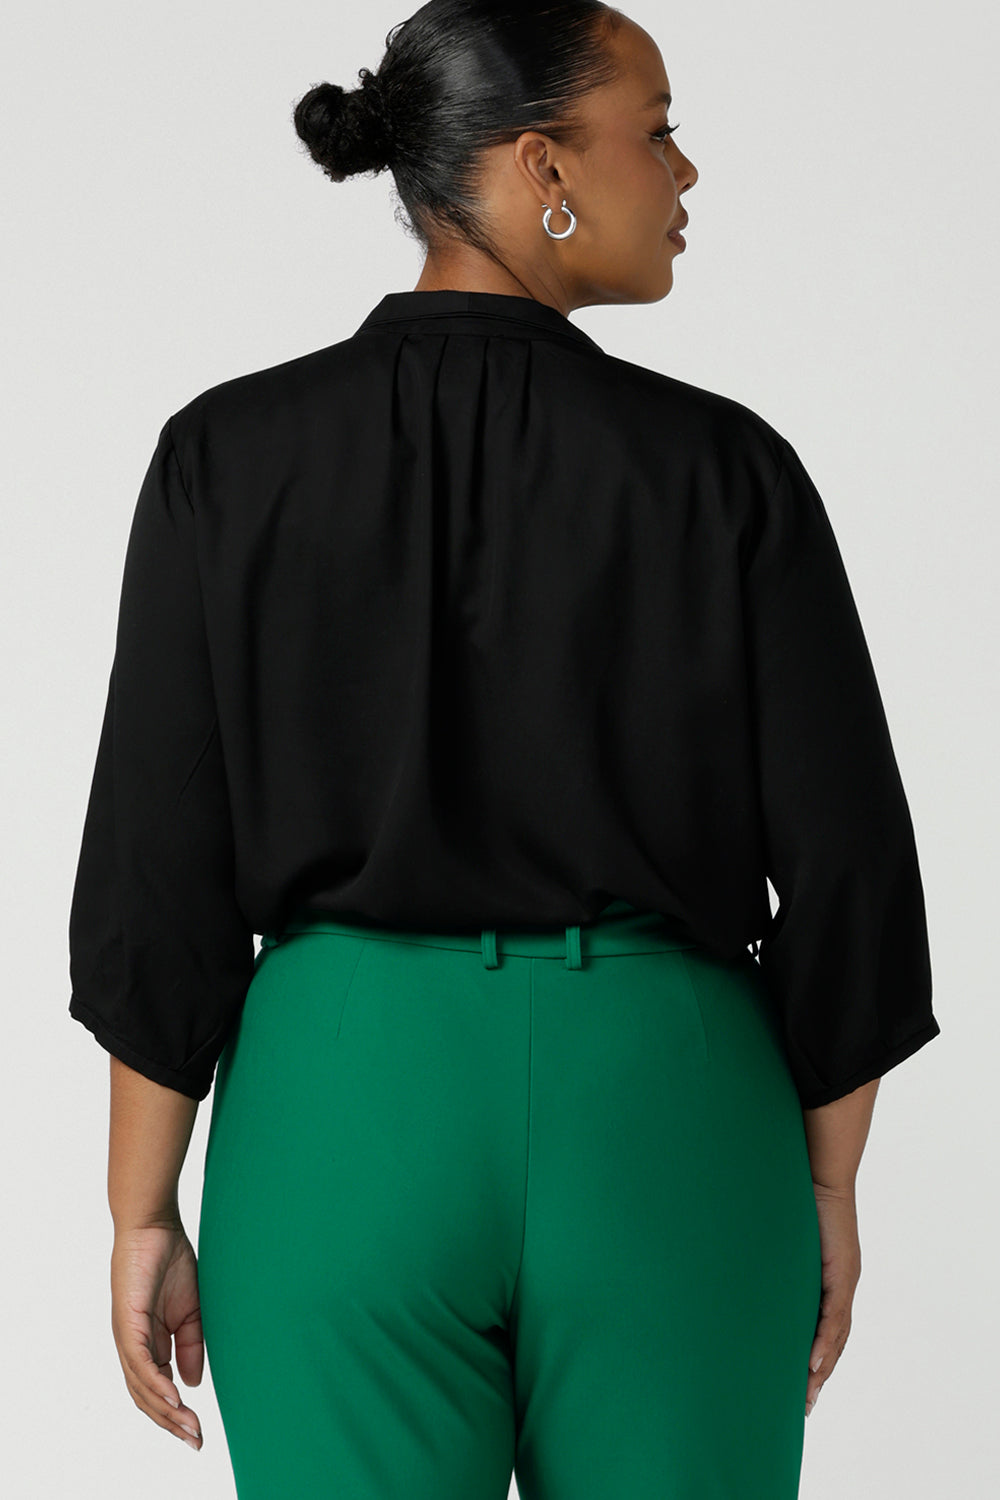 Back view of a size 18 curvy woman wearing a pull-on black shirt with 3/4 sleeves in eco-friendly Tencel. The shirt is worn with emerald green pants for a classic work wear look. This black shirt is made in Australia for petite to plus size women.